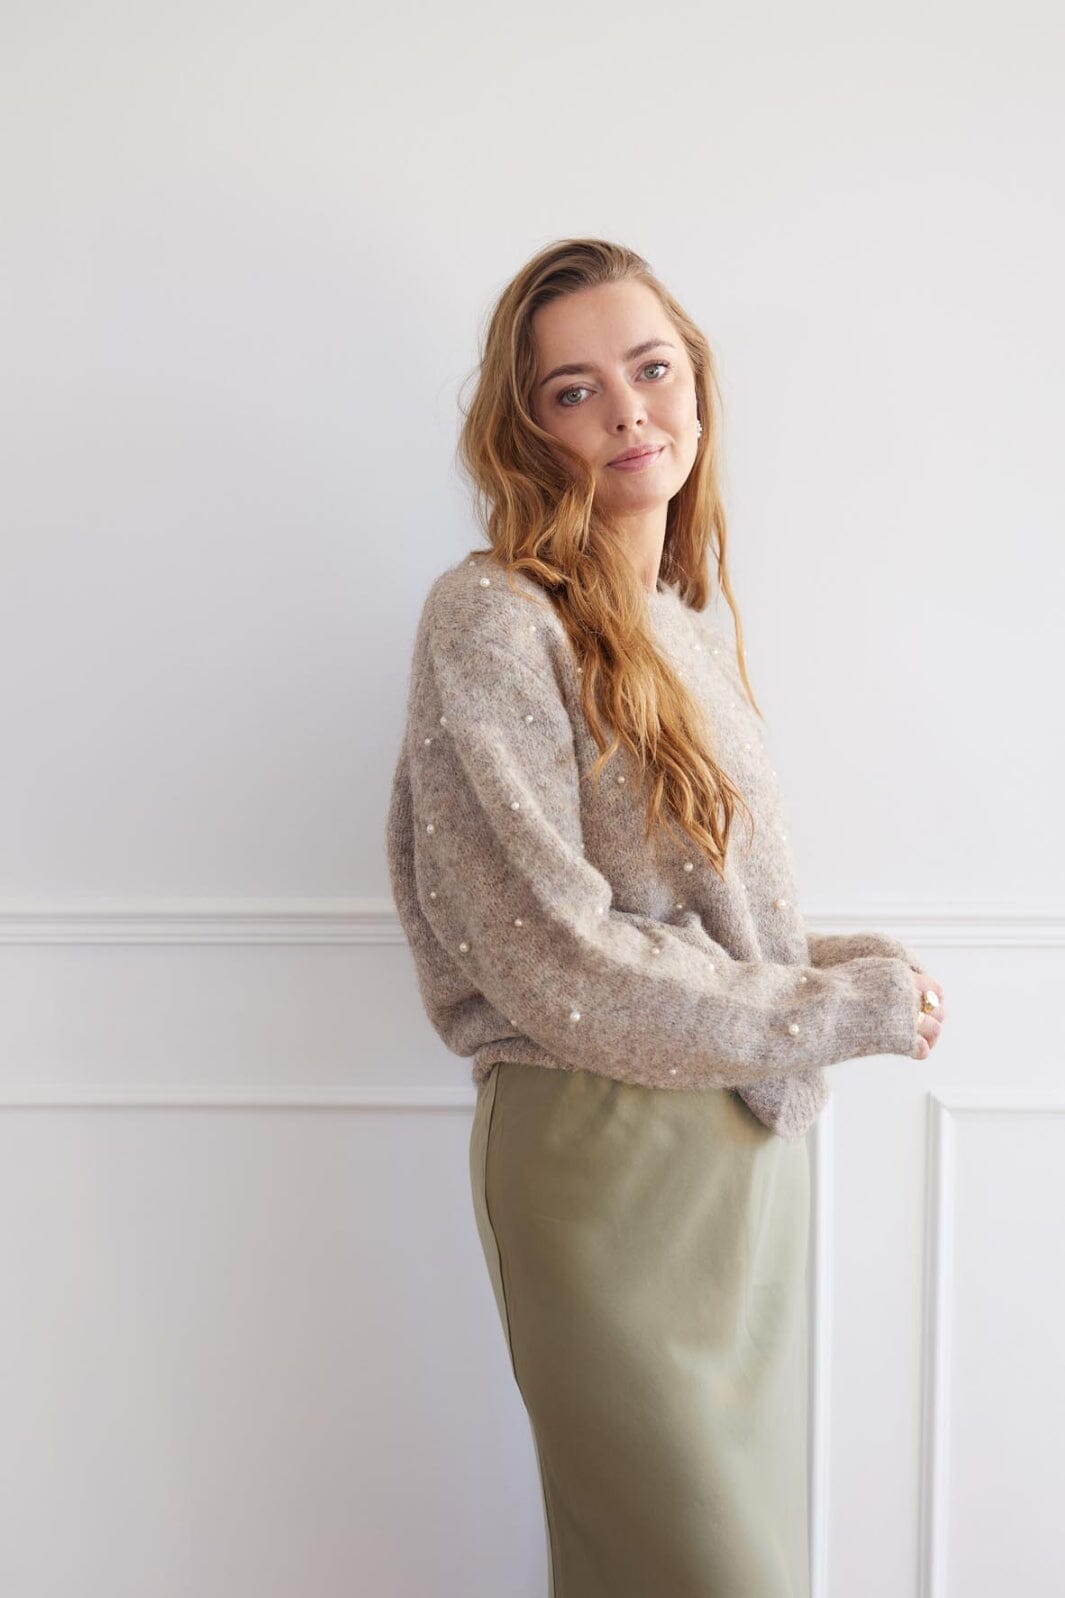 A-VIEW - Angel Knit Pullover - 118 Light Brown Strikbluser 